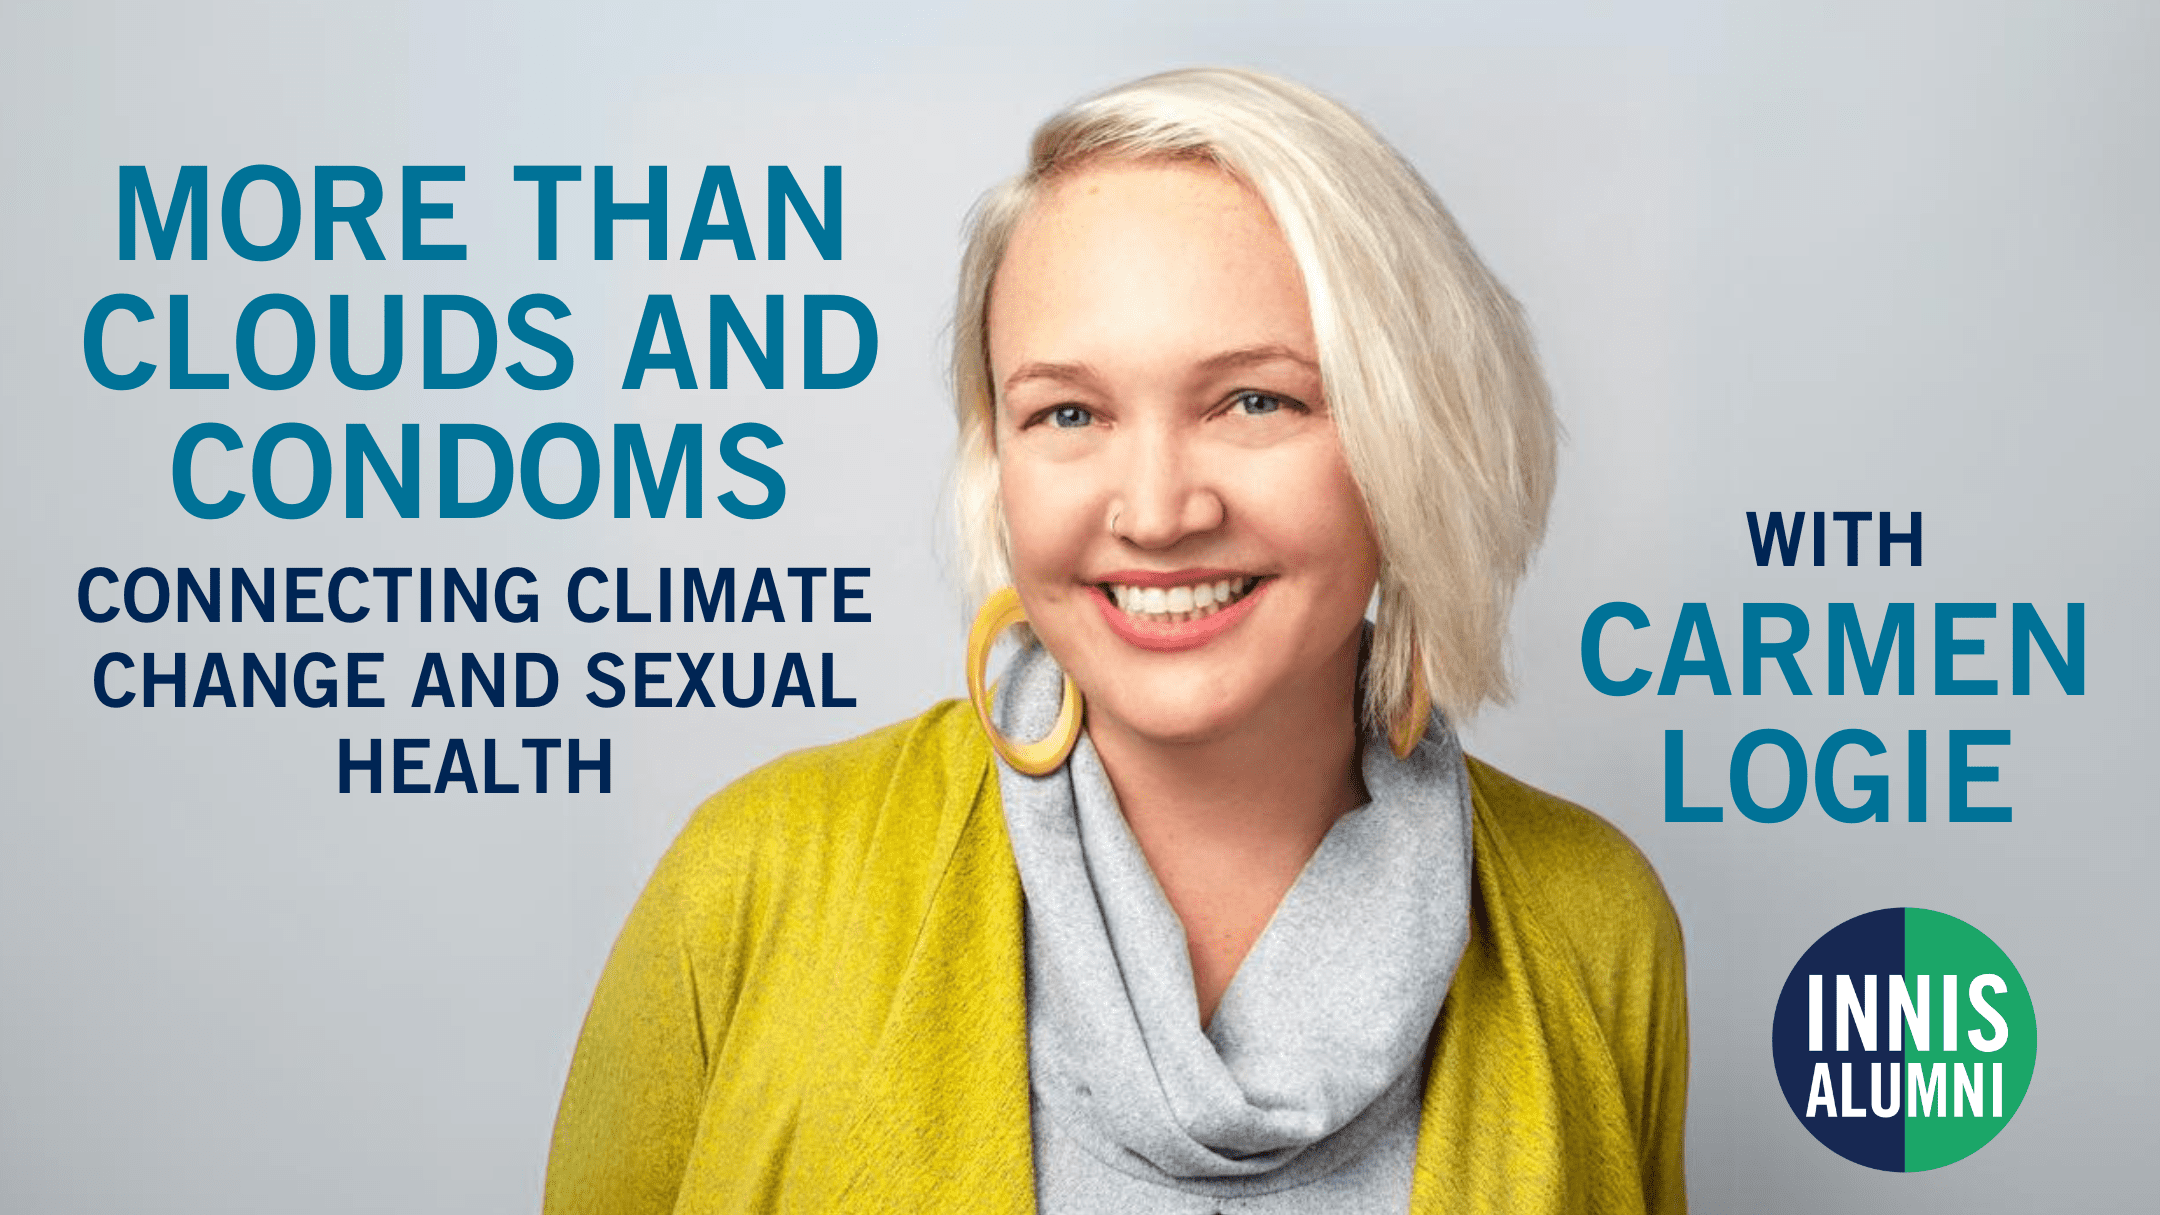 online poster for Carmen Logie's Innis Alumni lecture: More than clouds and condoms: connecting climate change and sexual health"